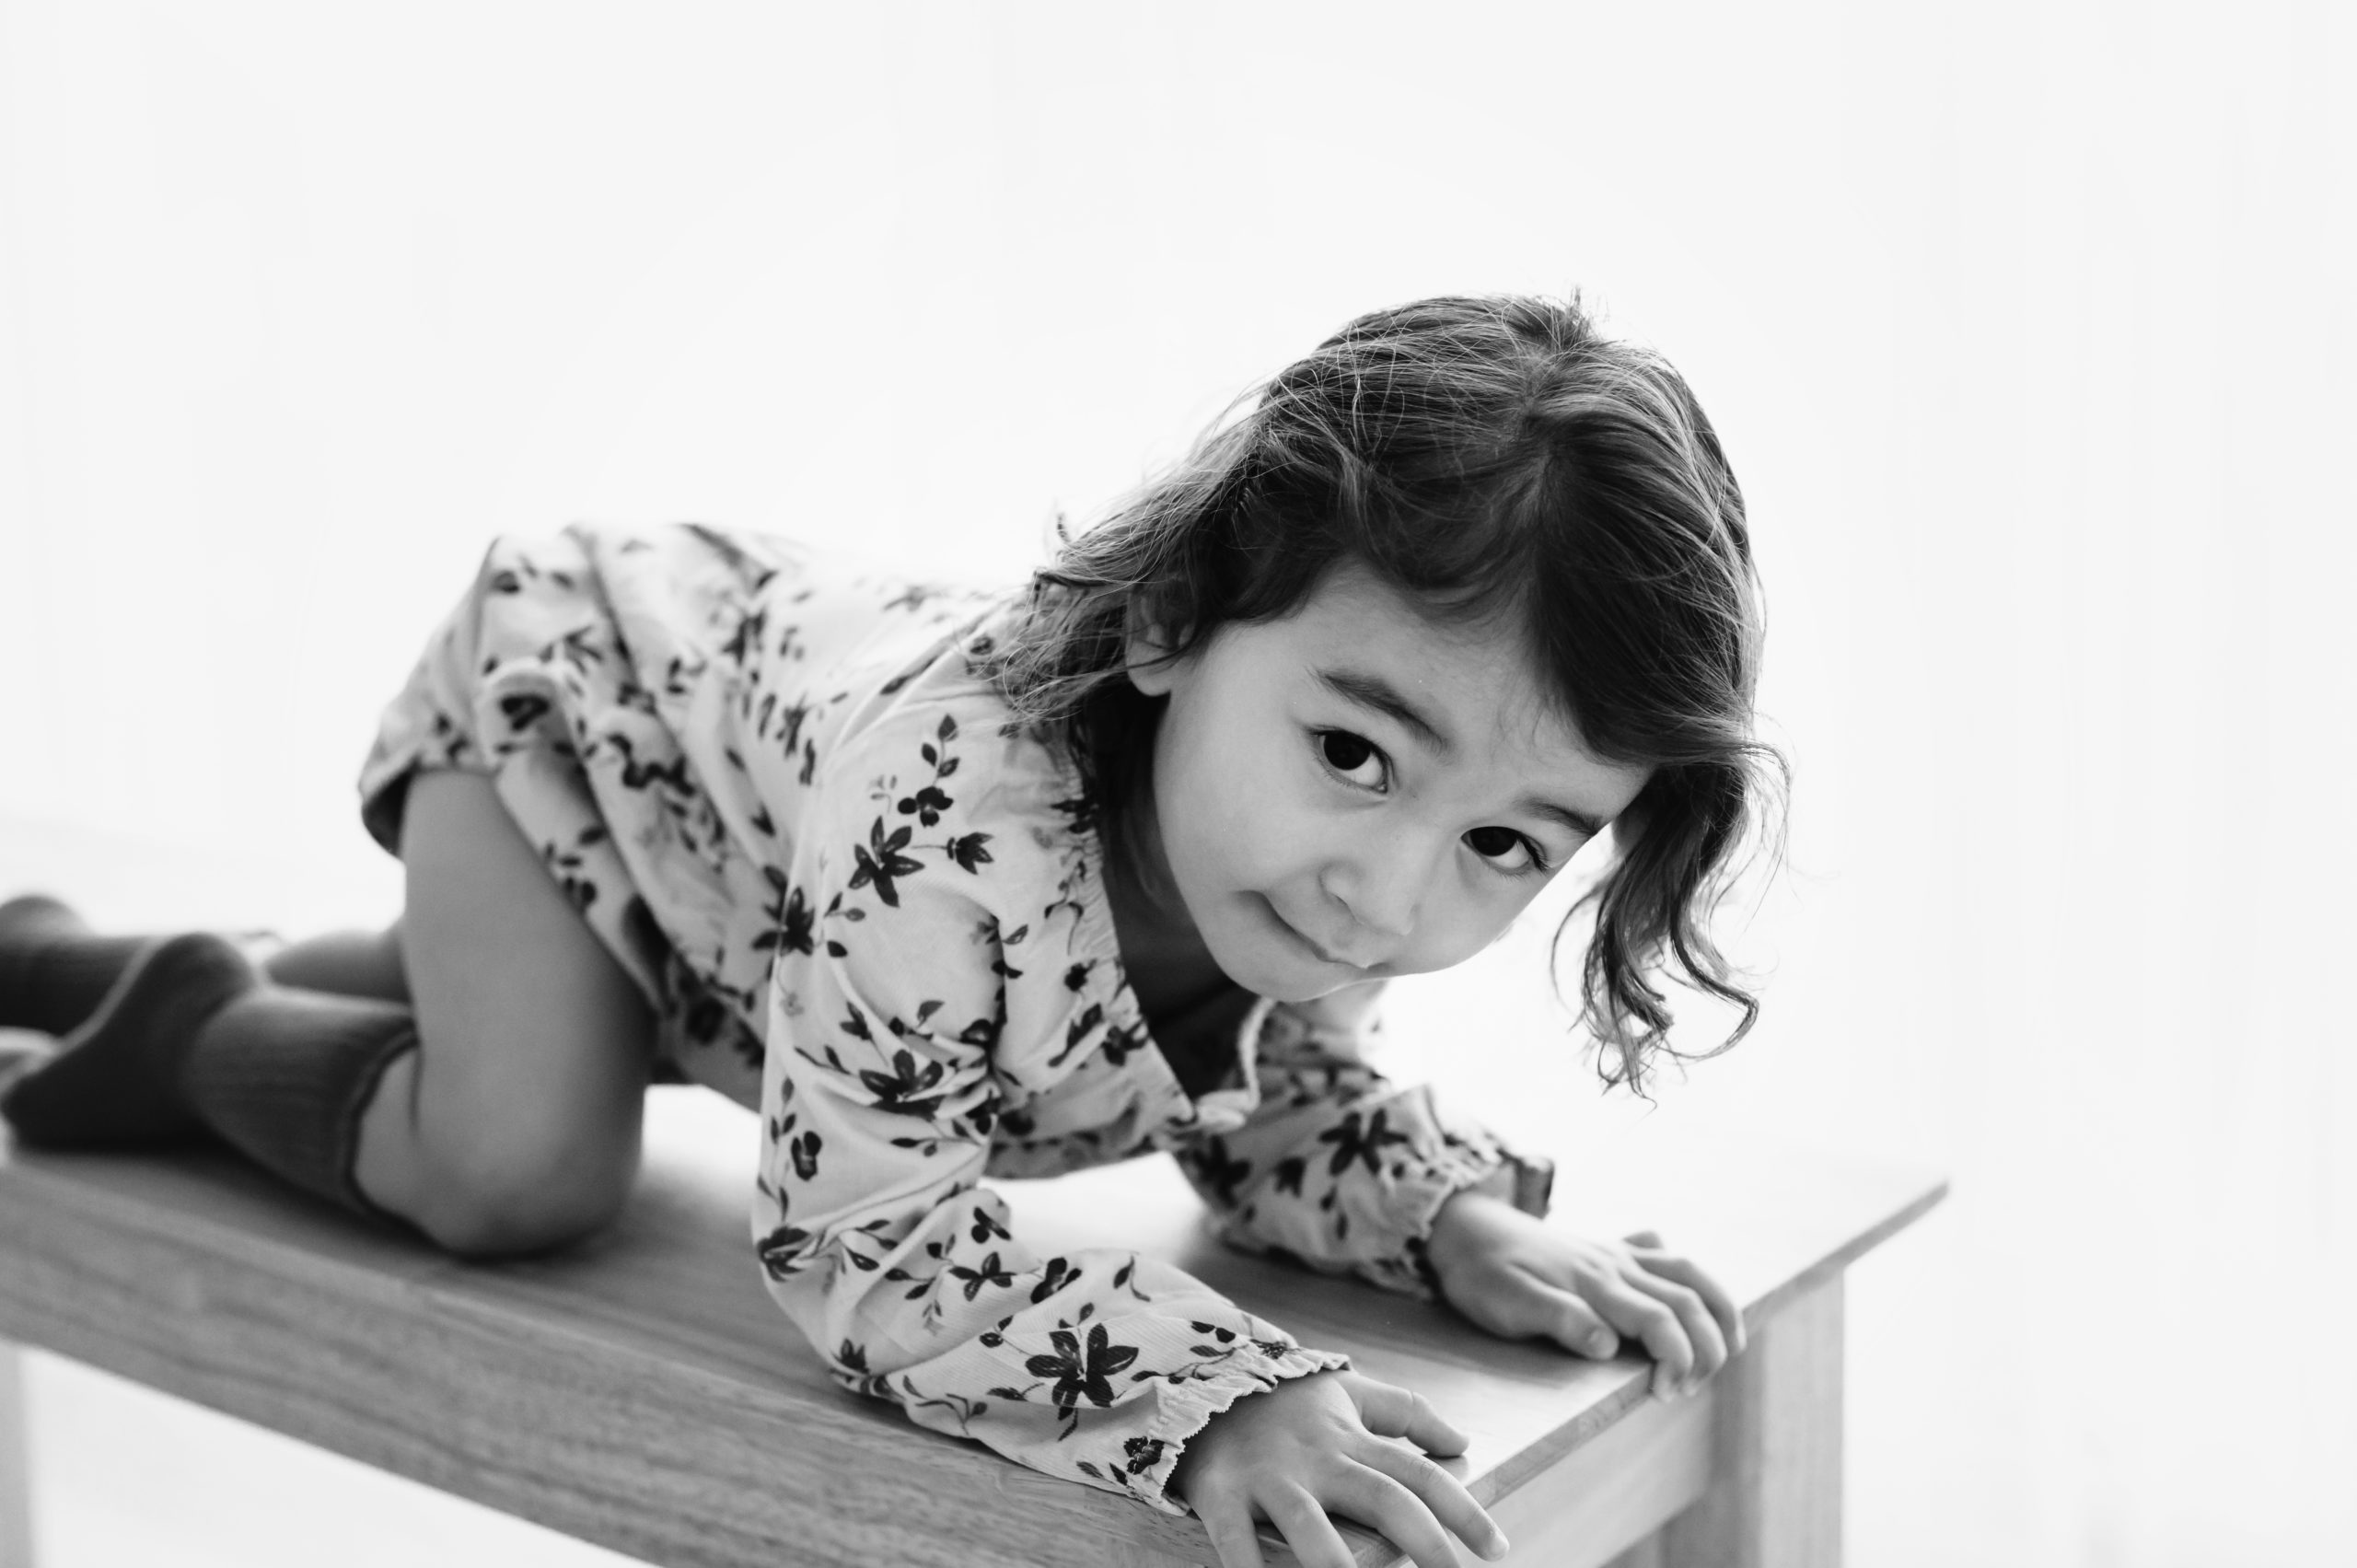 a black and white backlit phot of a young girl crawling across a wooden bench and looking up at the camera during a studio milestone photoshoot